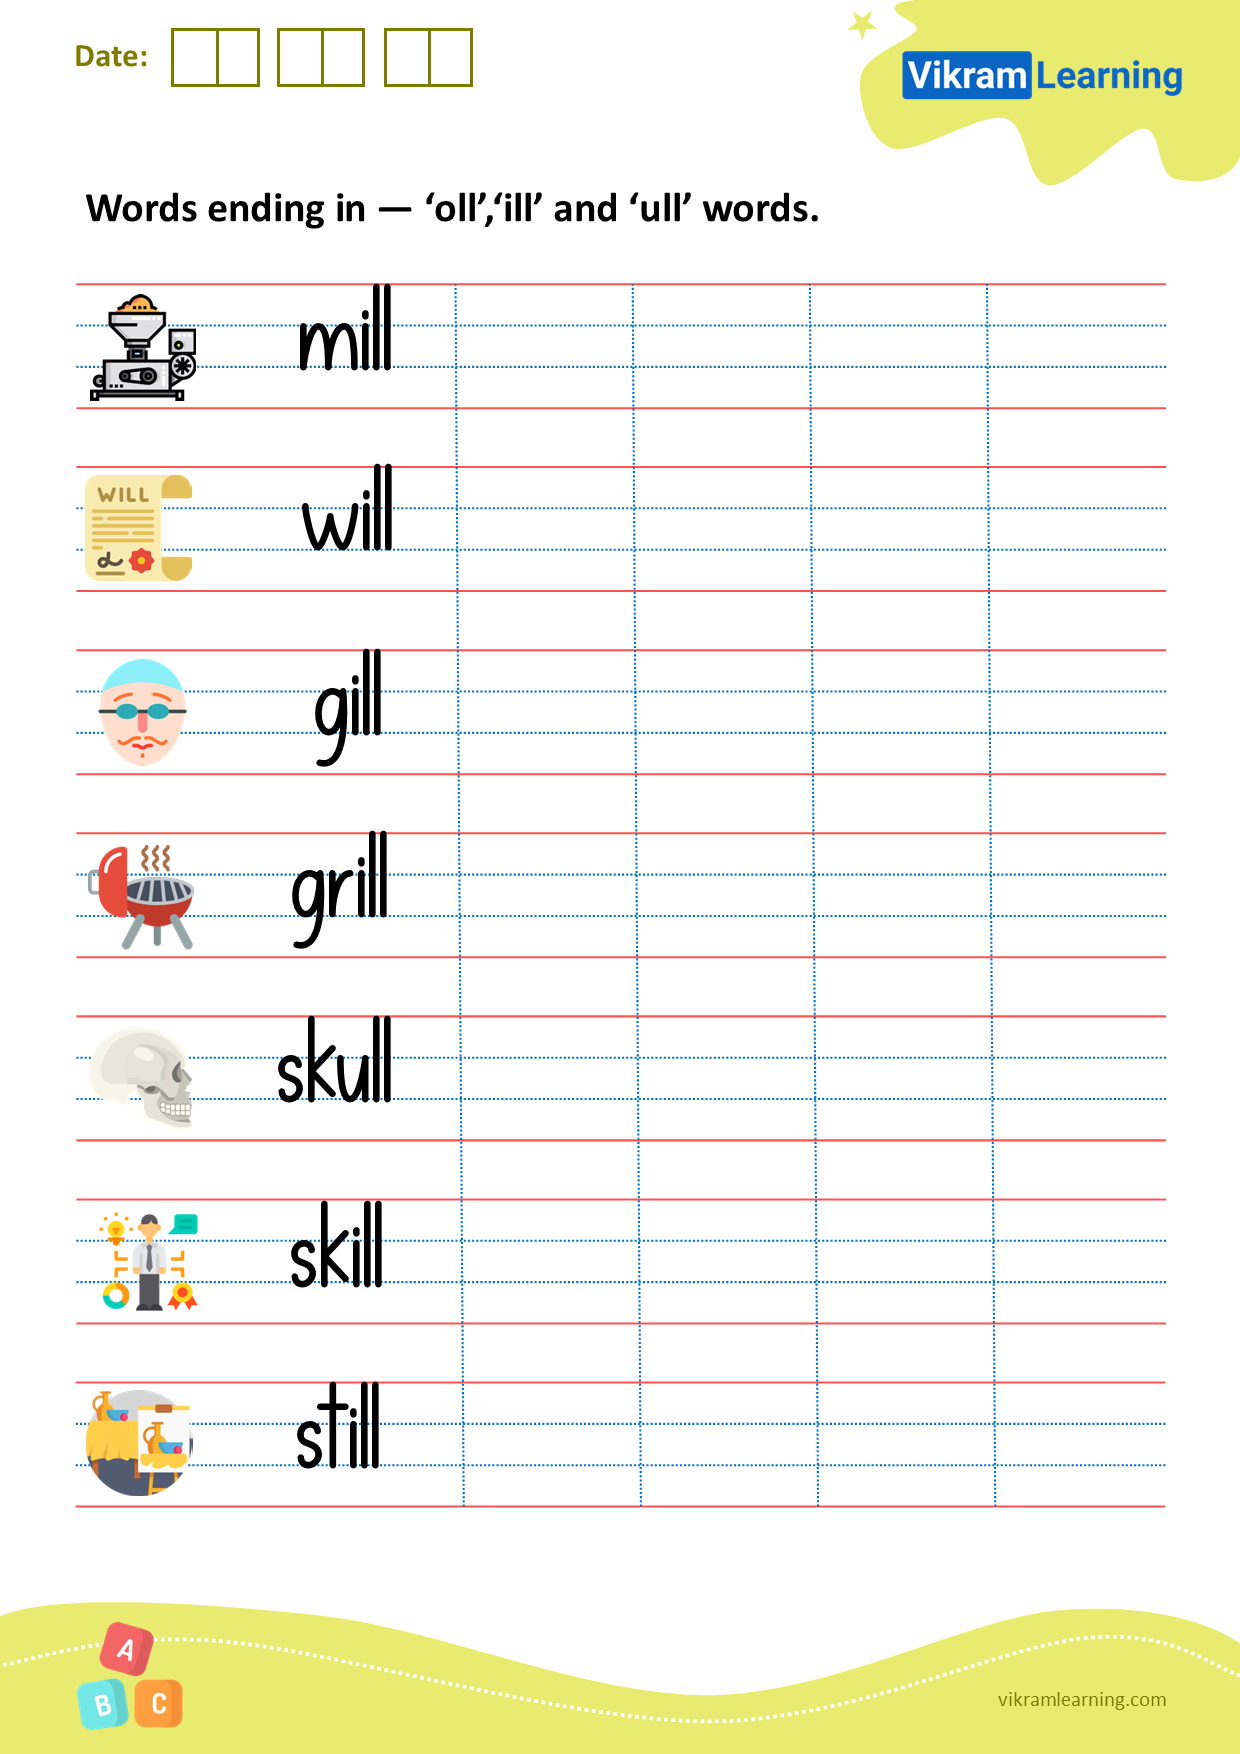 Download words ending in — ‘oll’,‘ill’ and ‘ull’ words worksheets